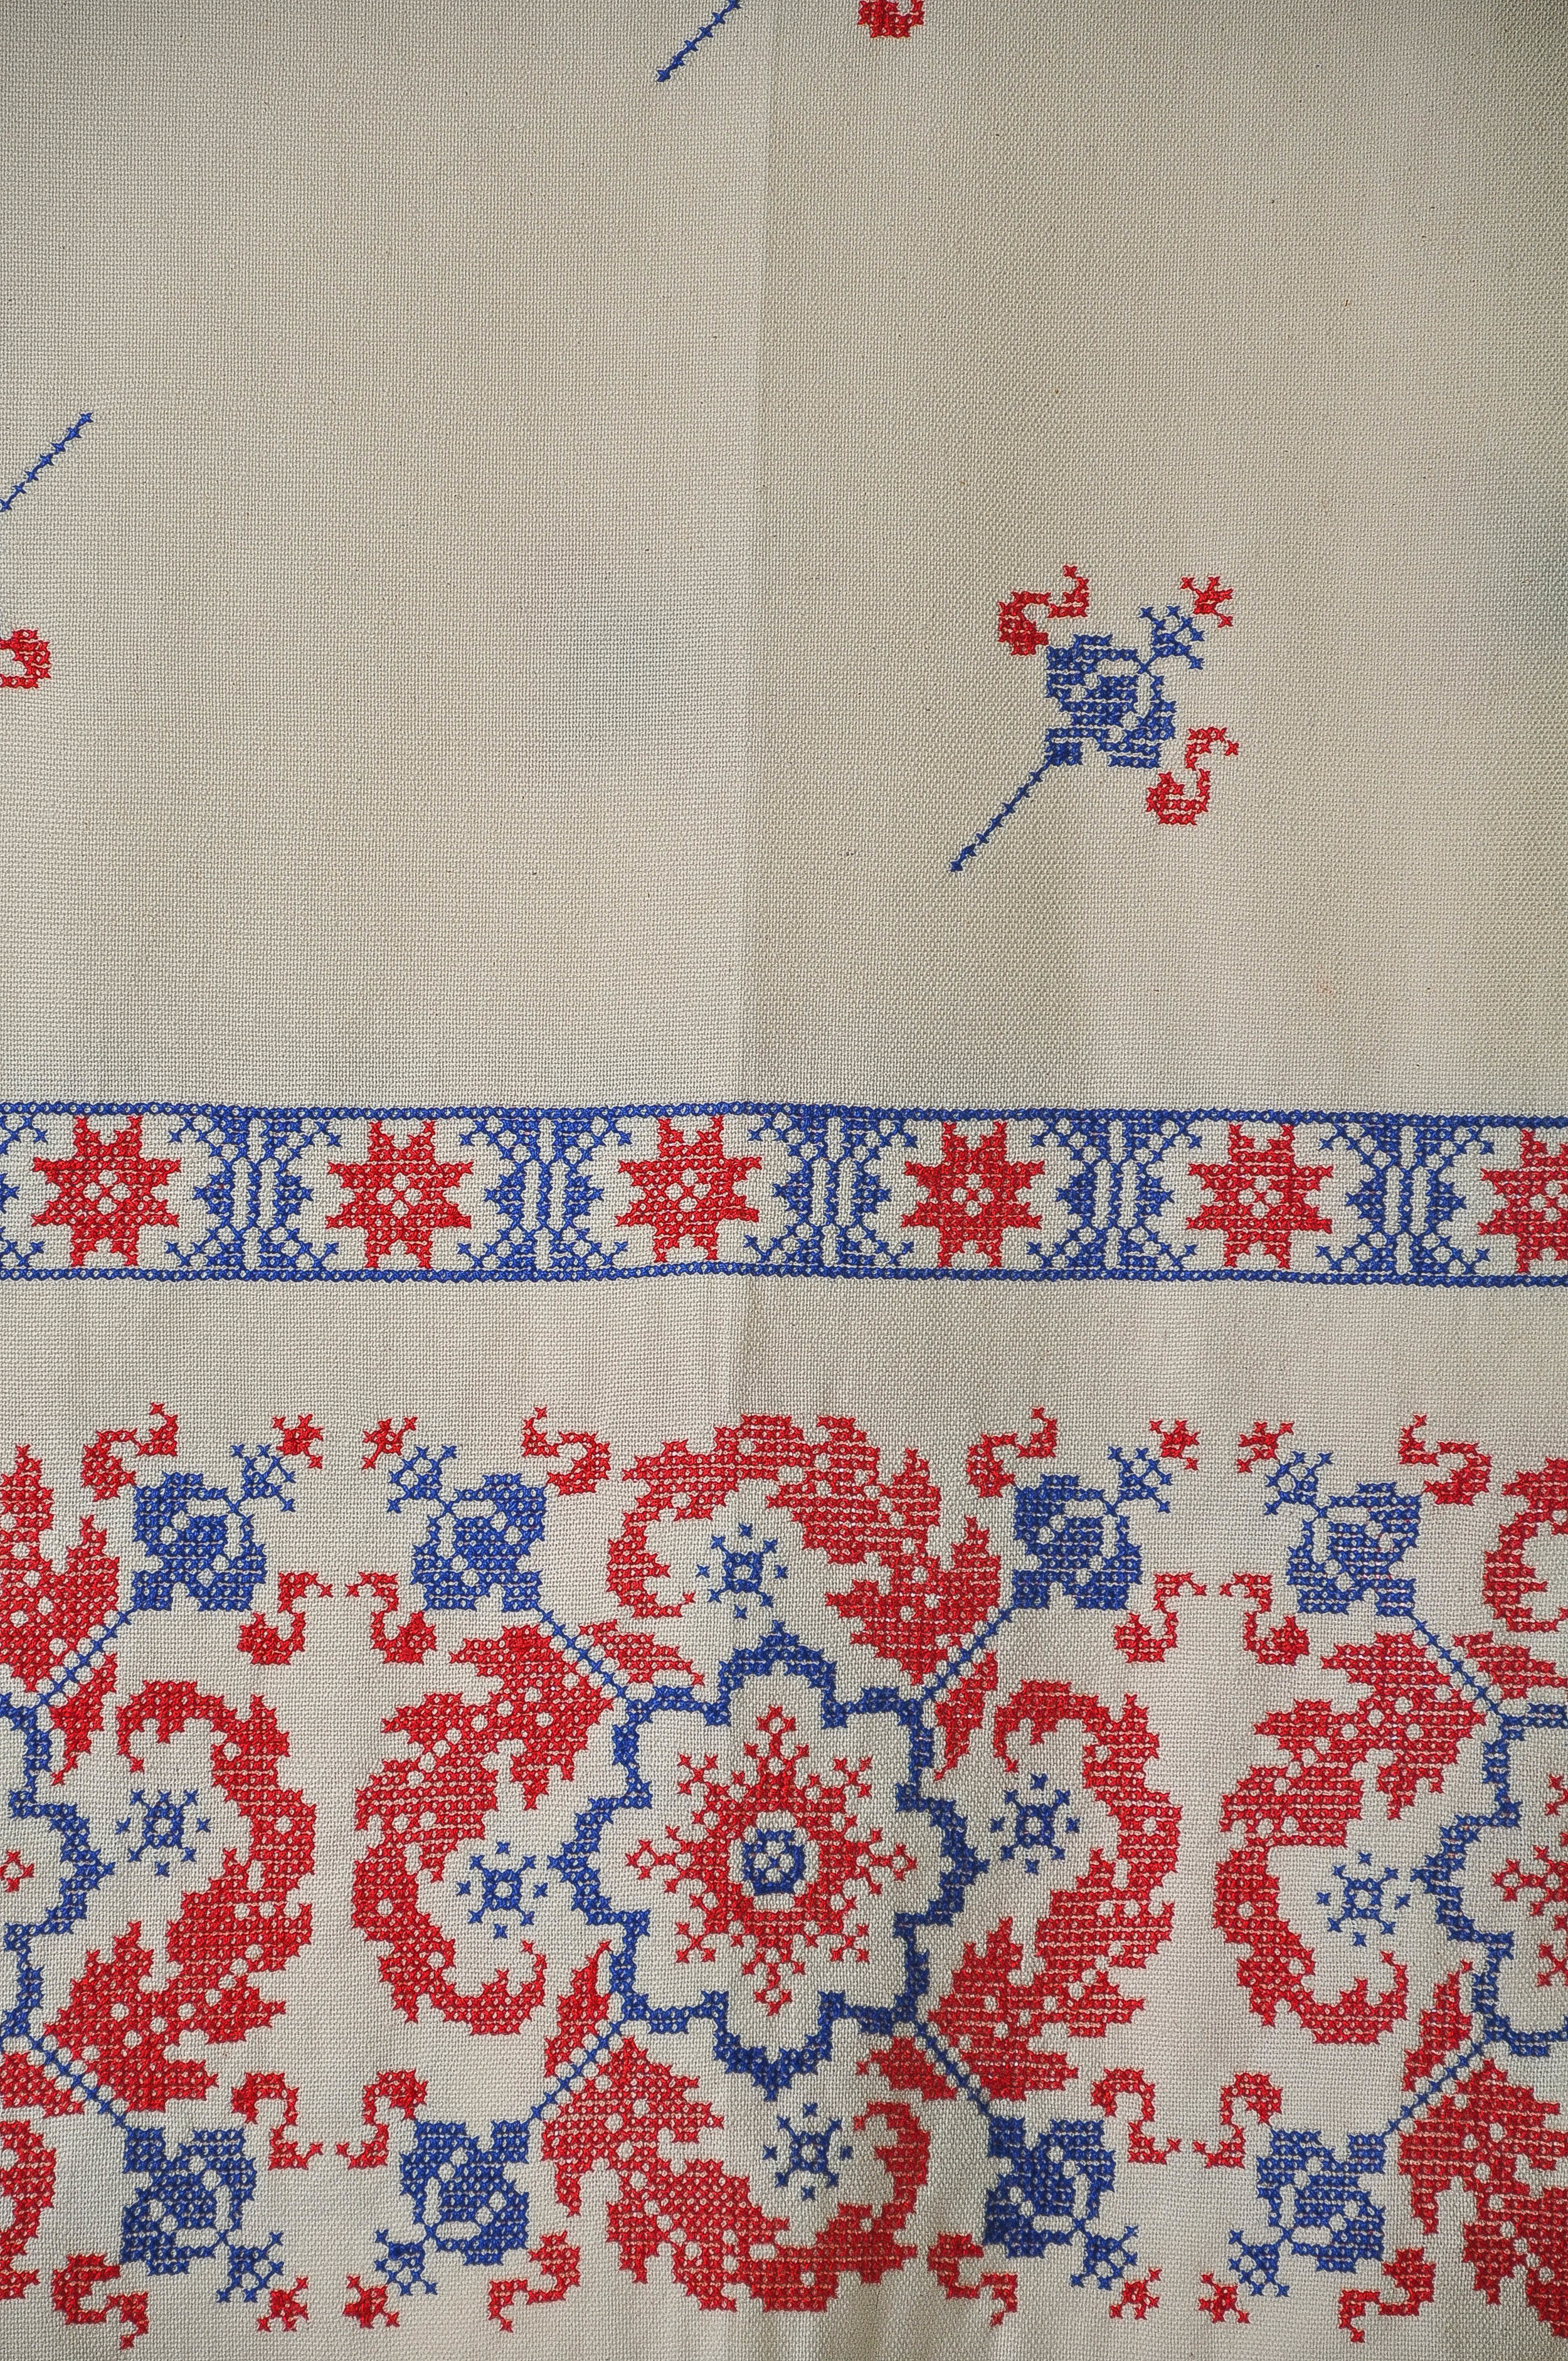 Embroidered Texdtiles from Mexico (16).jpg